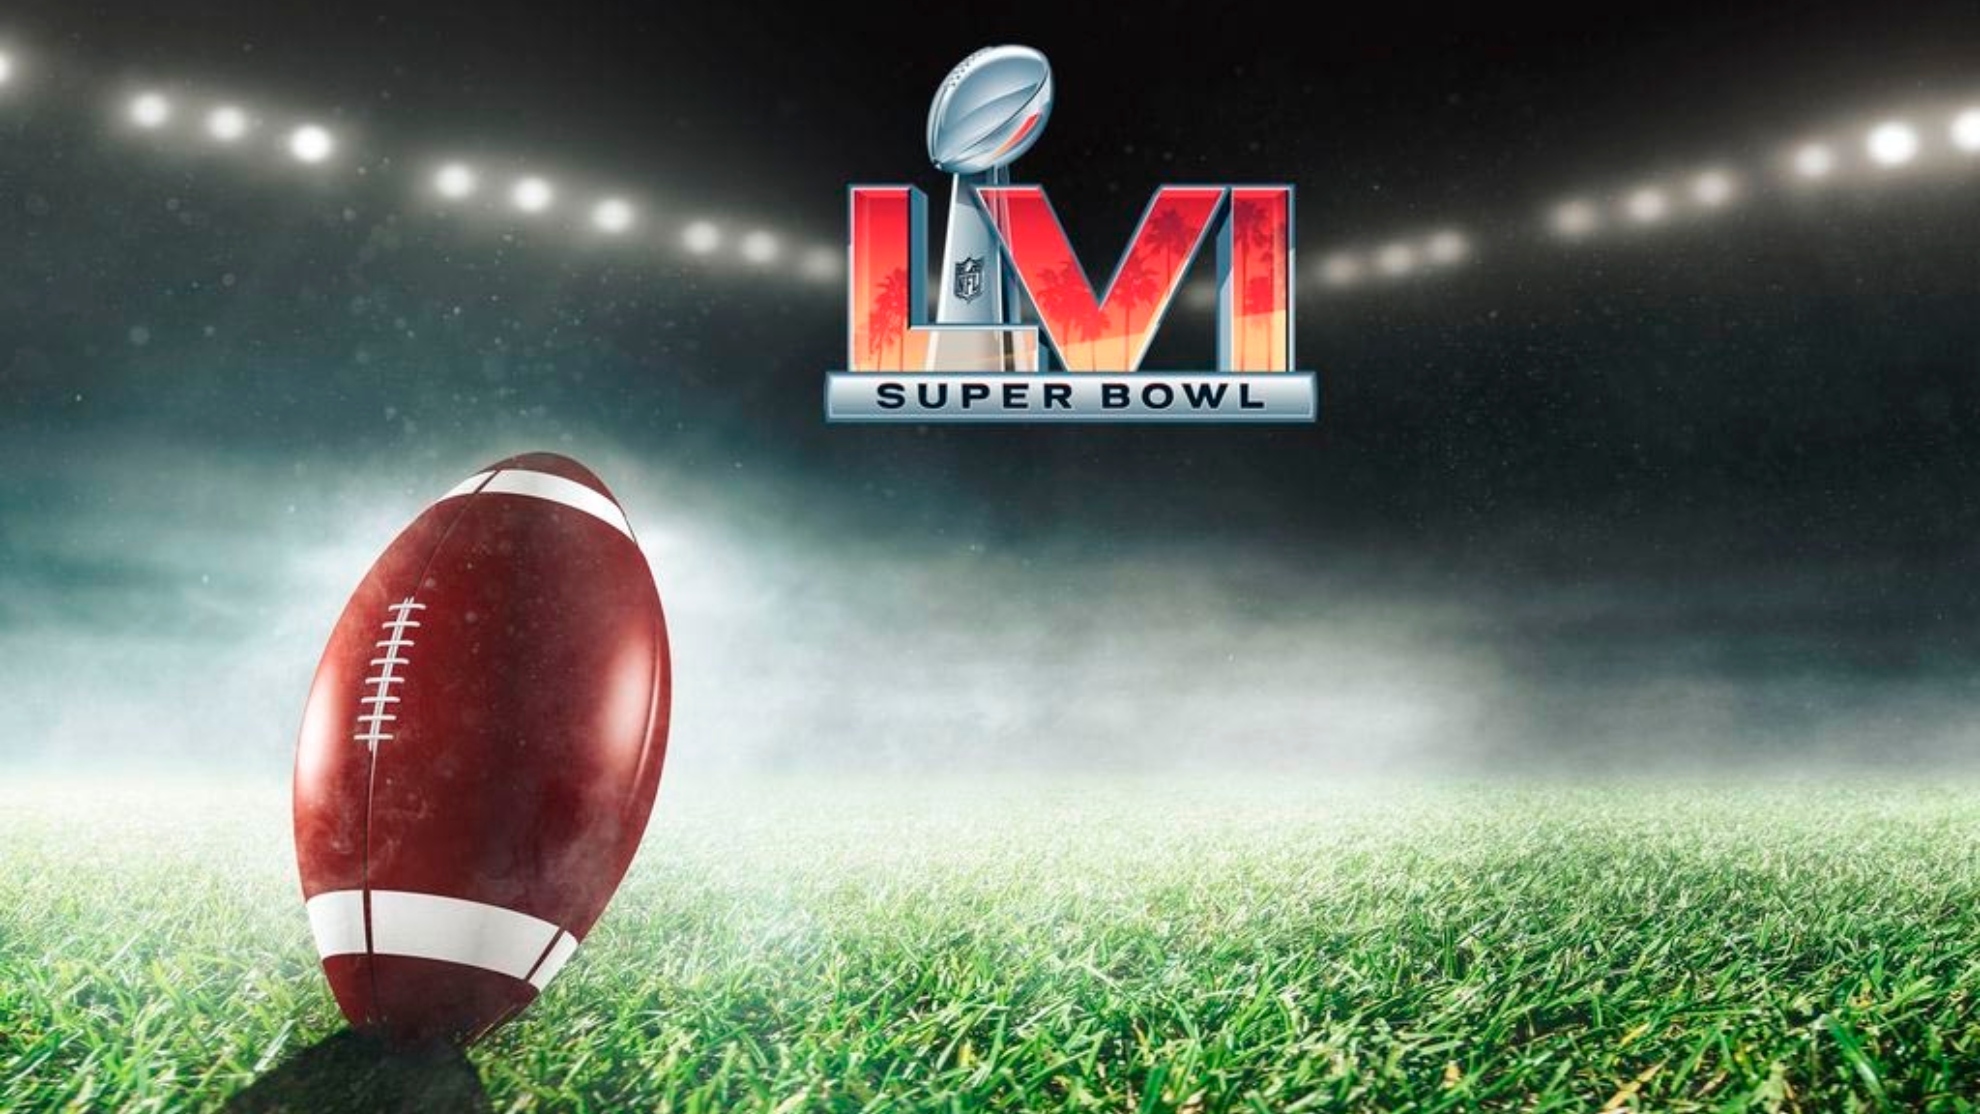 super bowl sunday where to watch